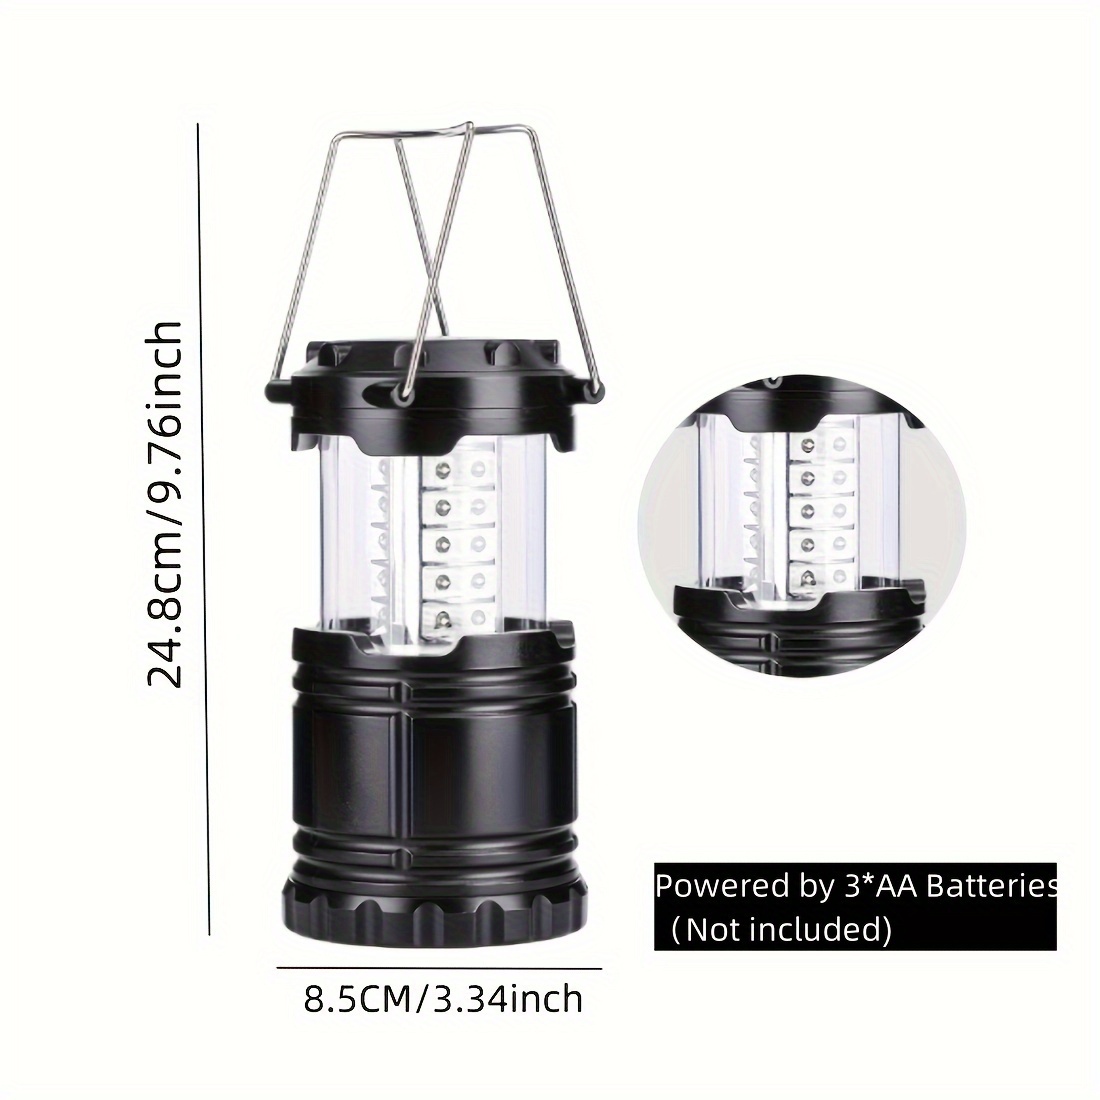 Camping Lanterns Batteries, Lamp Battery Operated Tent